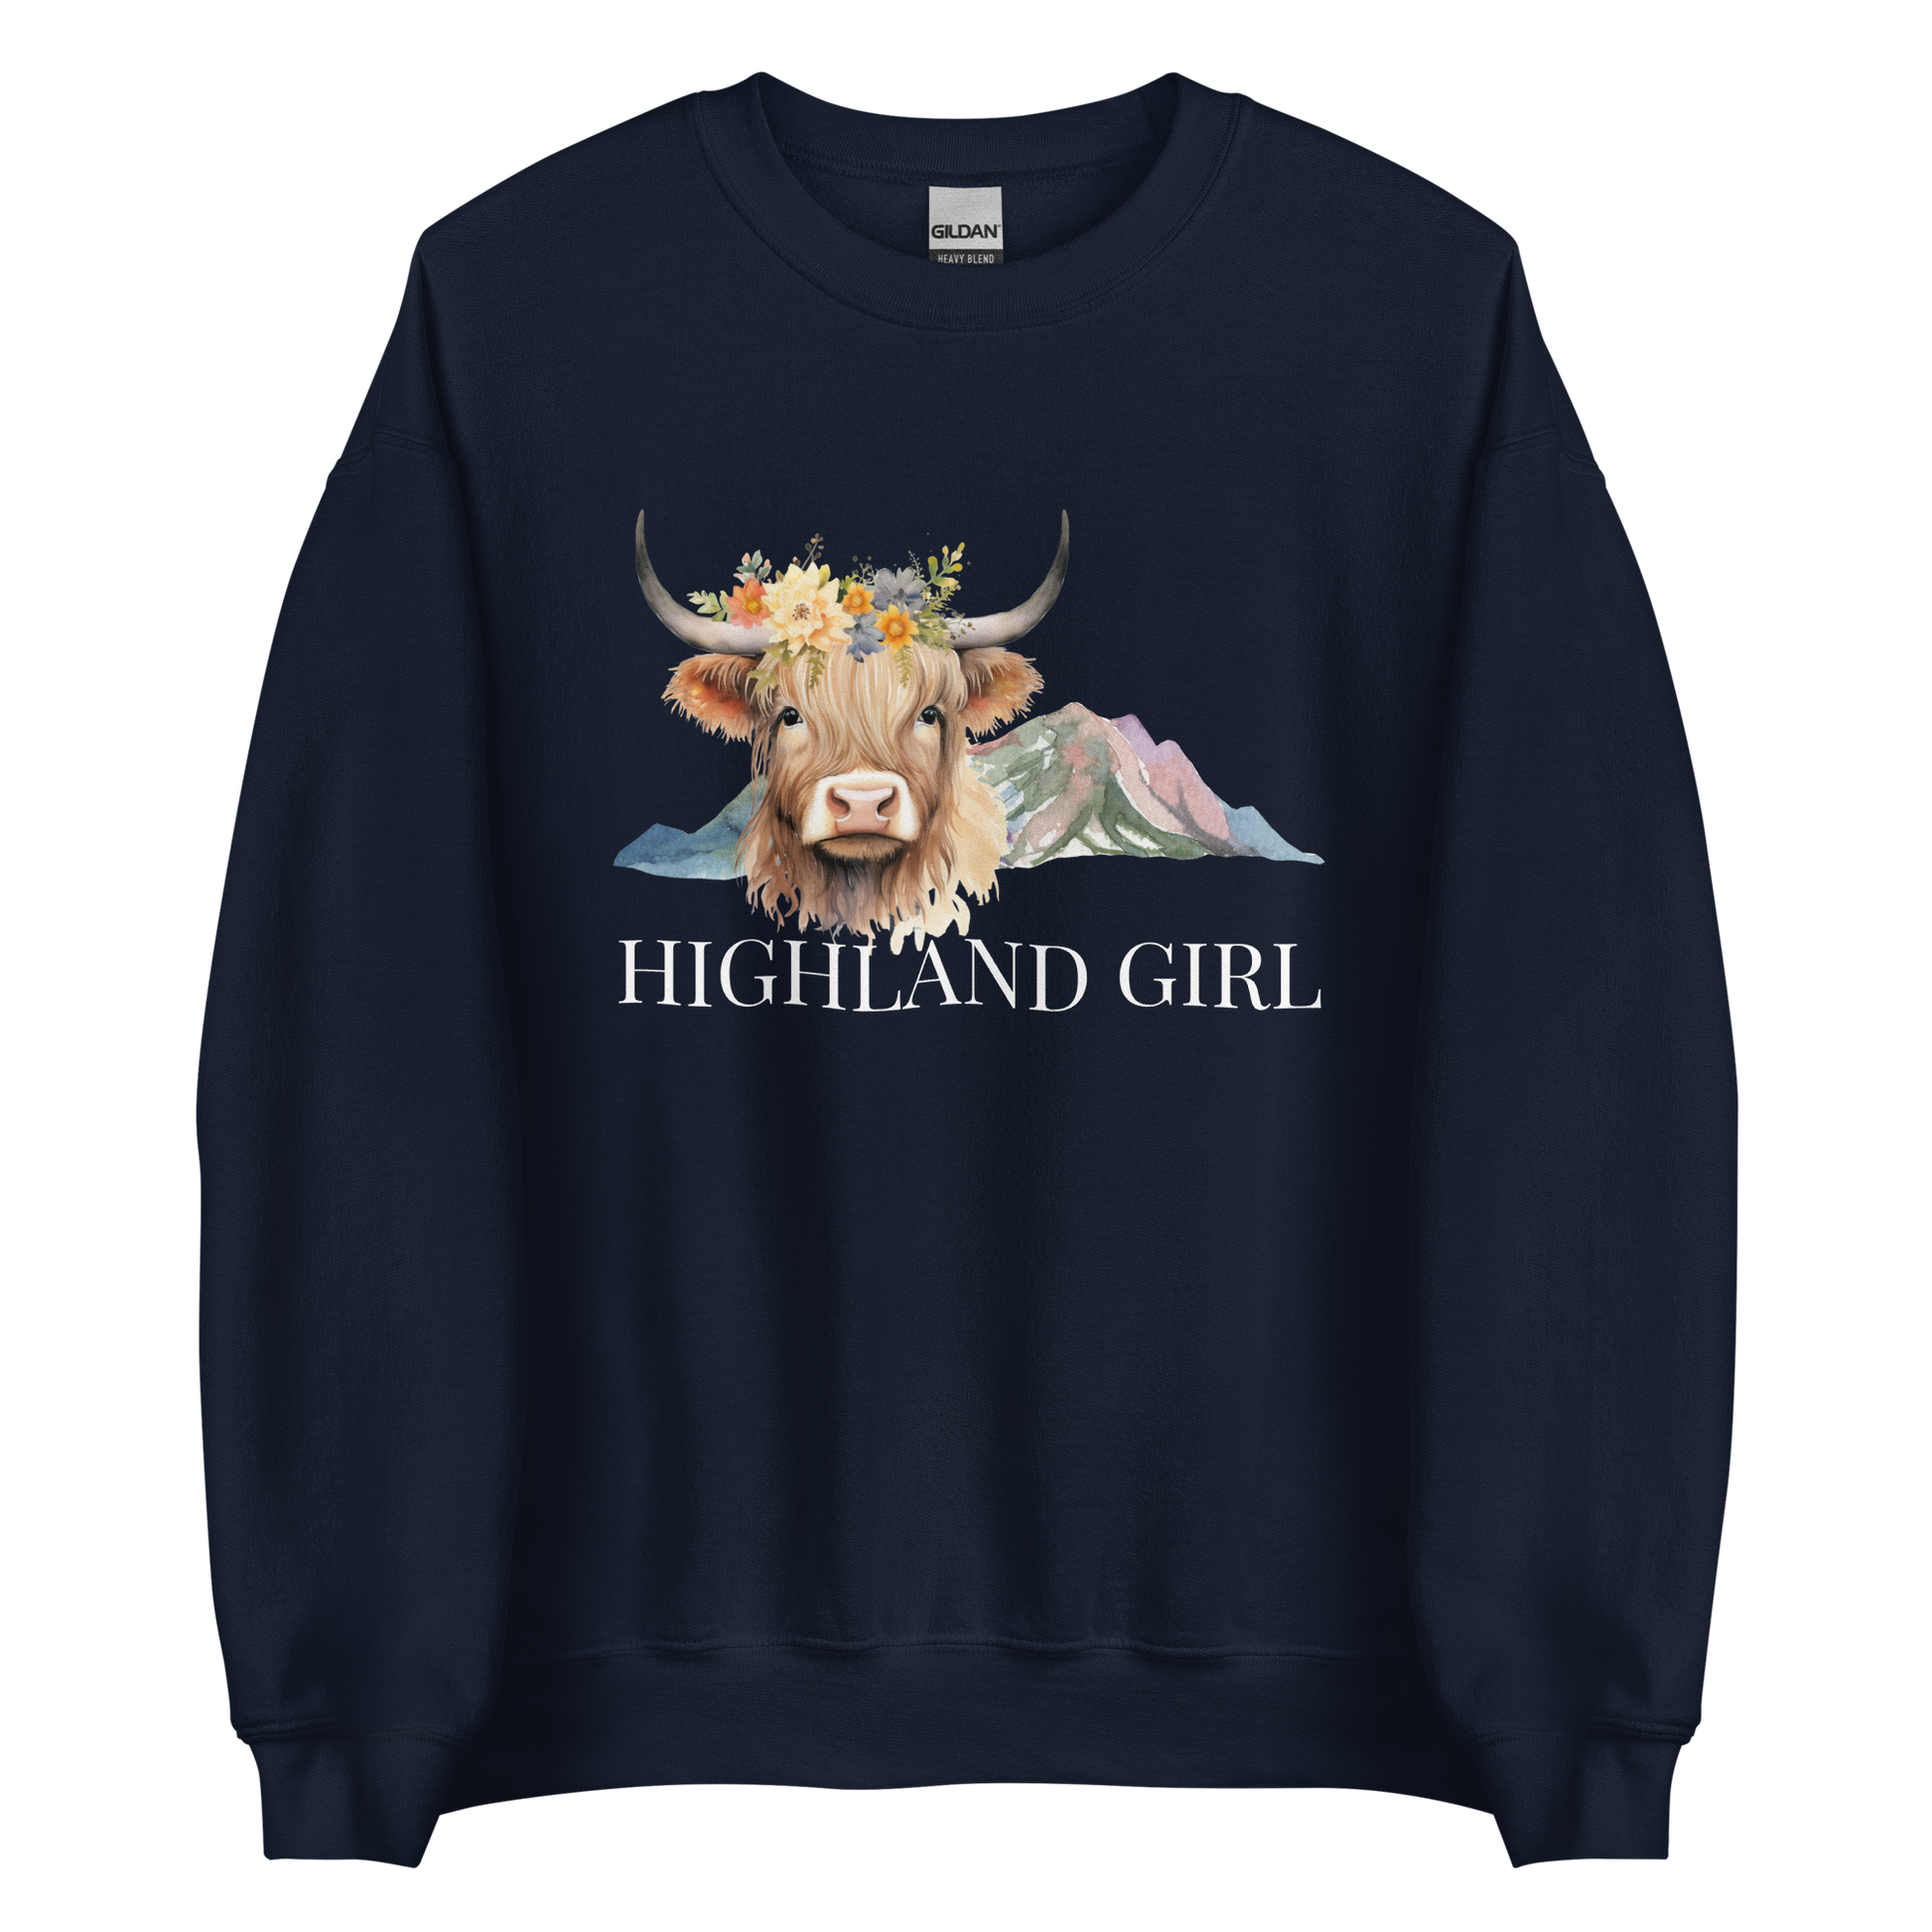 Navy Highland Cow Sweatshirt featuring an adorable Highland Girl graphic on the chest - Cute Graphic Highland Cow Sweatshirts - Boozy Fox